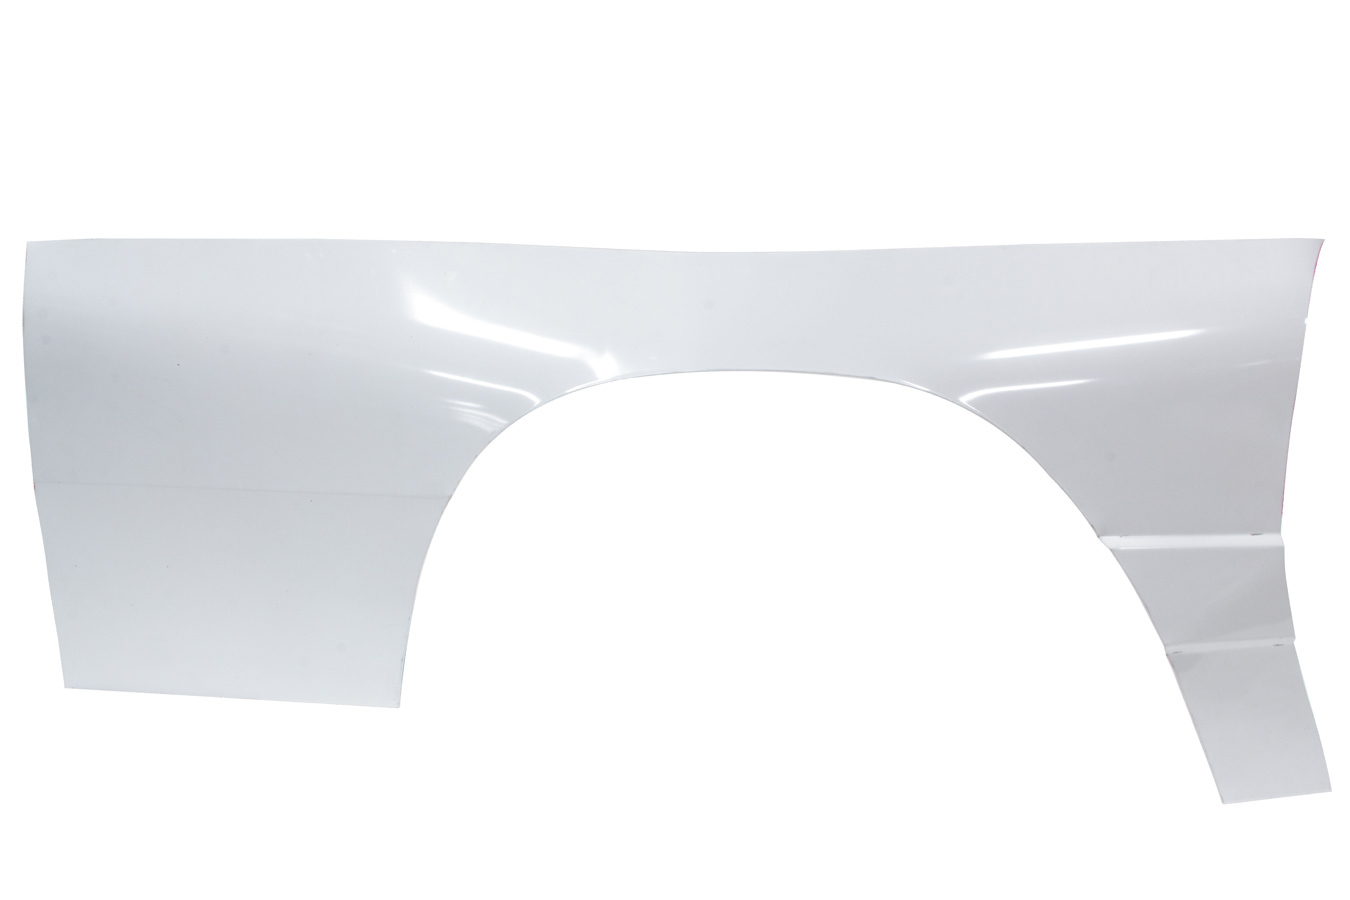 Fender - Driver Side - Lower - Street Stock - Steel - White Paint - Chevy Monte Carlo 1988 - Each